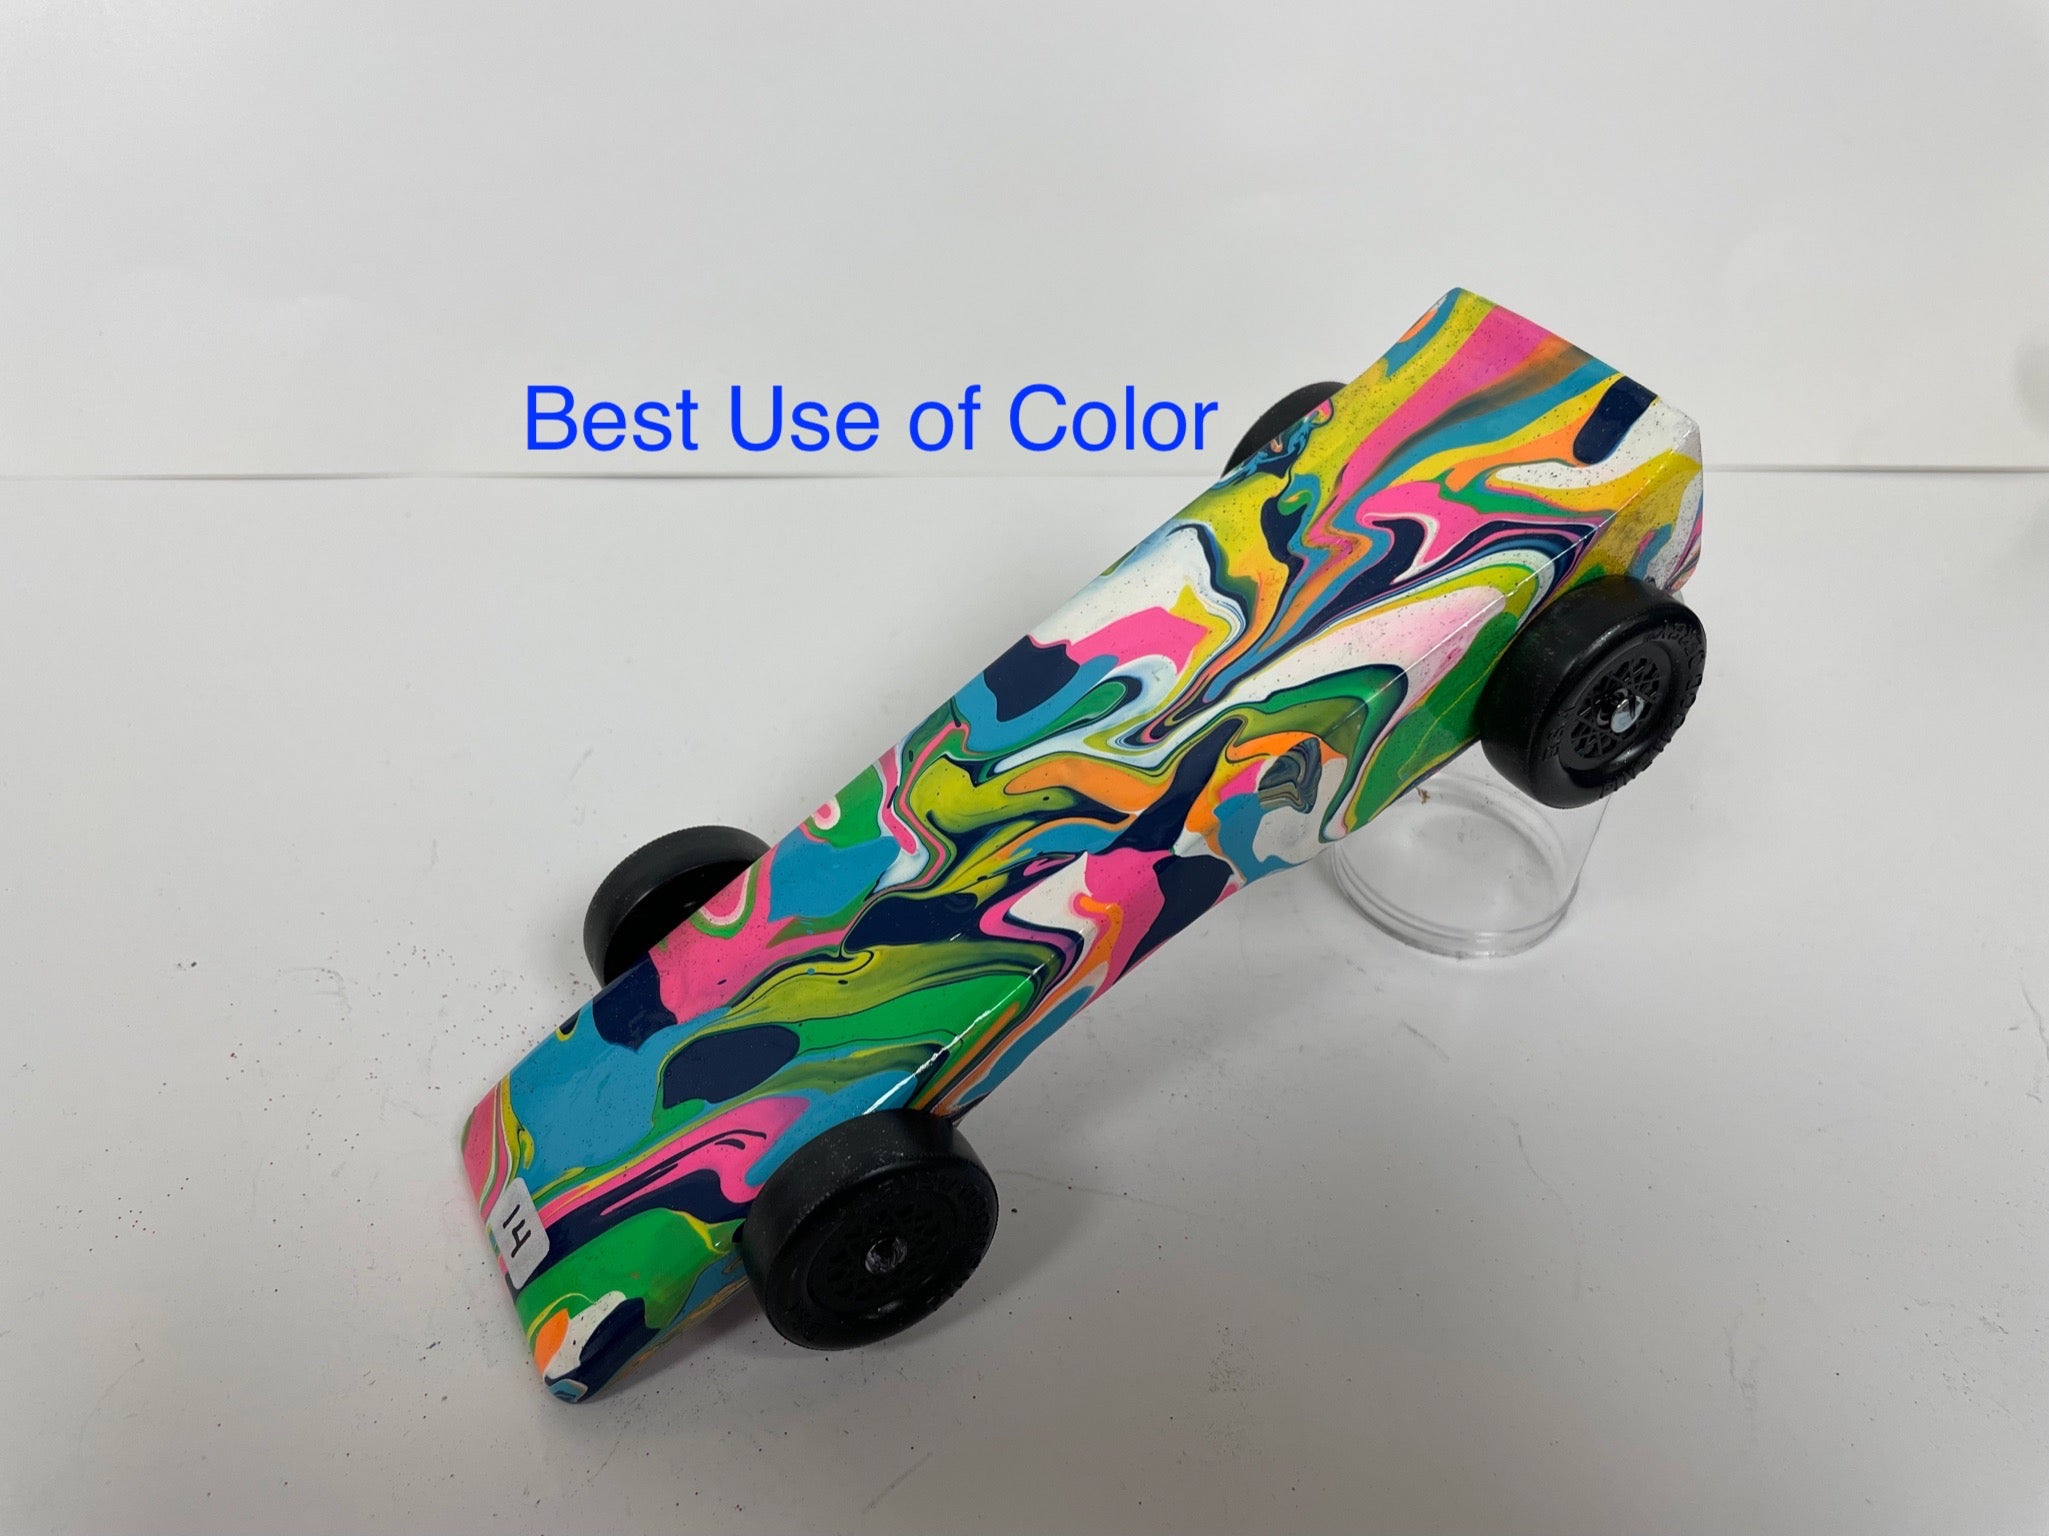 The 2023 Cub Pack 110 Pinewood Derby Race